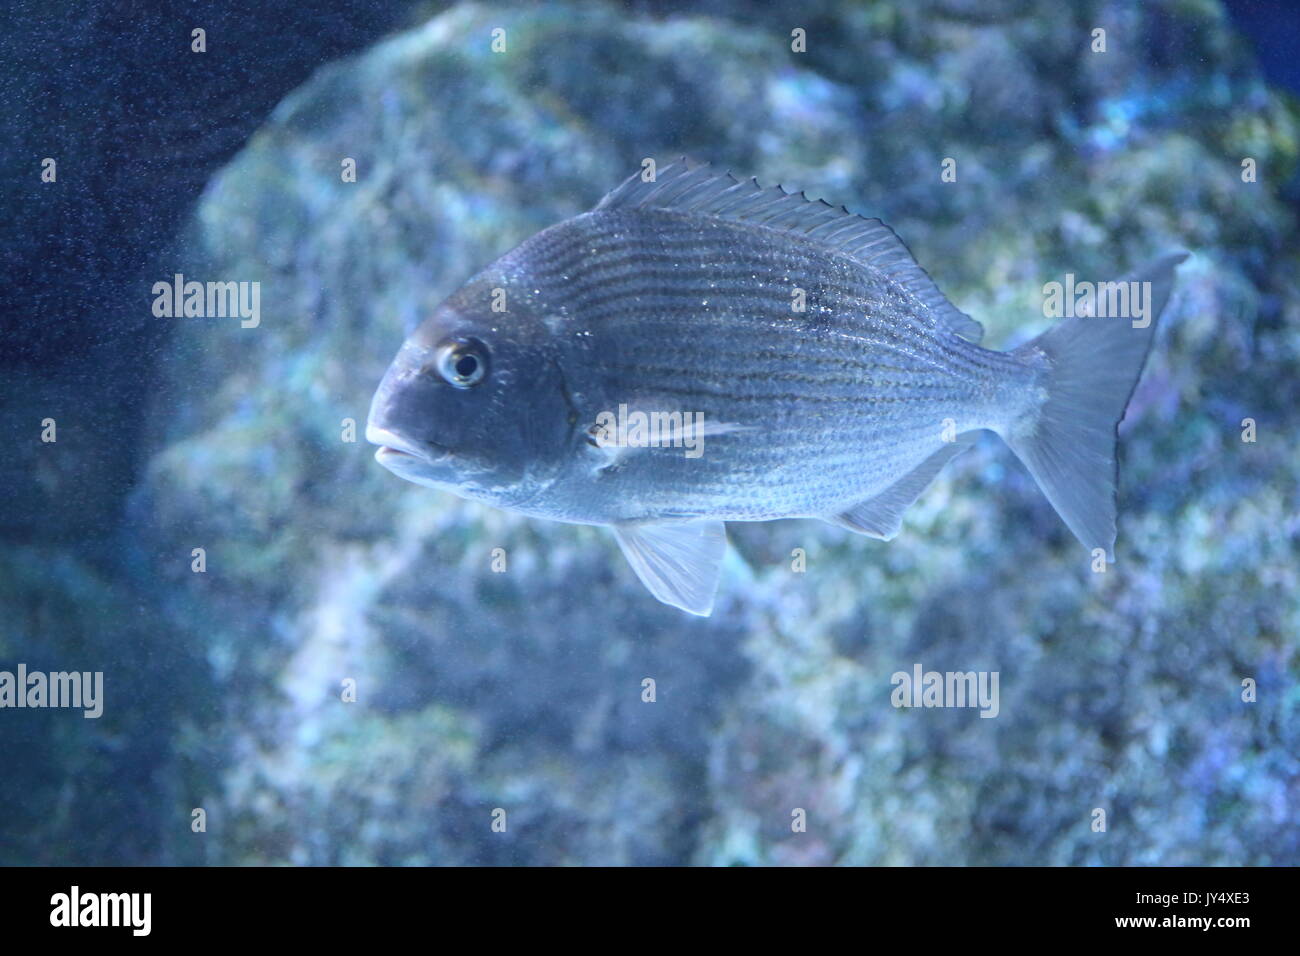 Red seabream (Pagrus major) in Japan Stock Photo